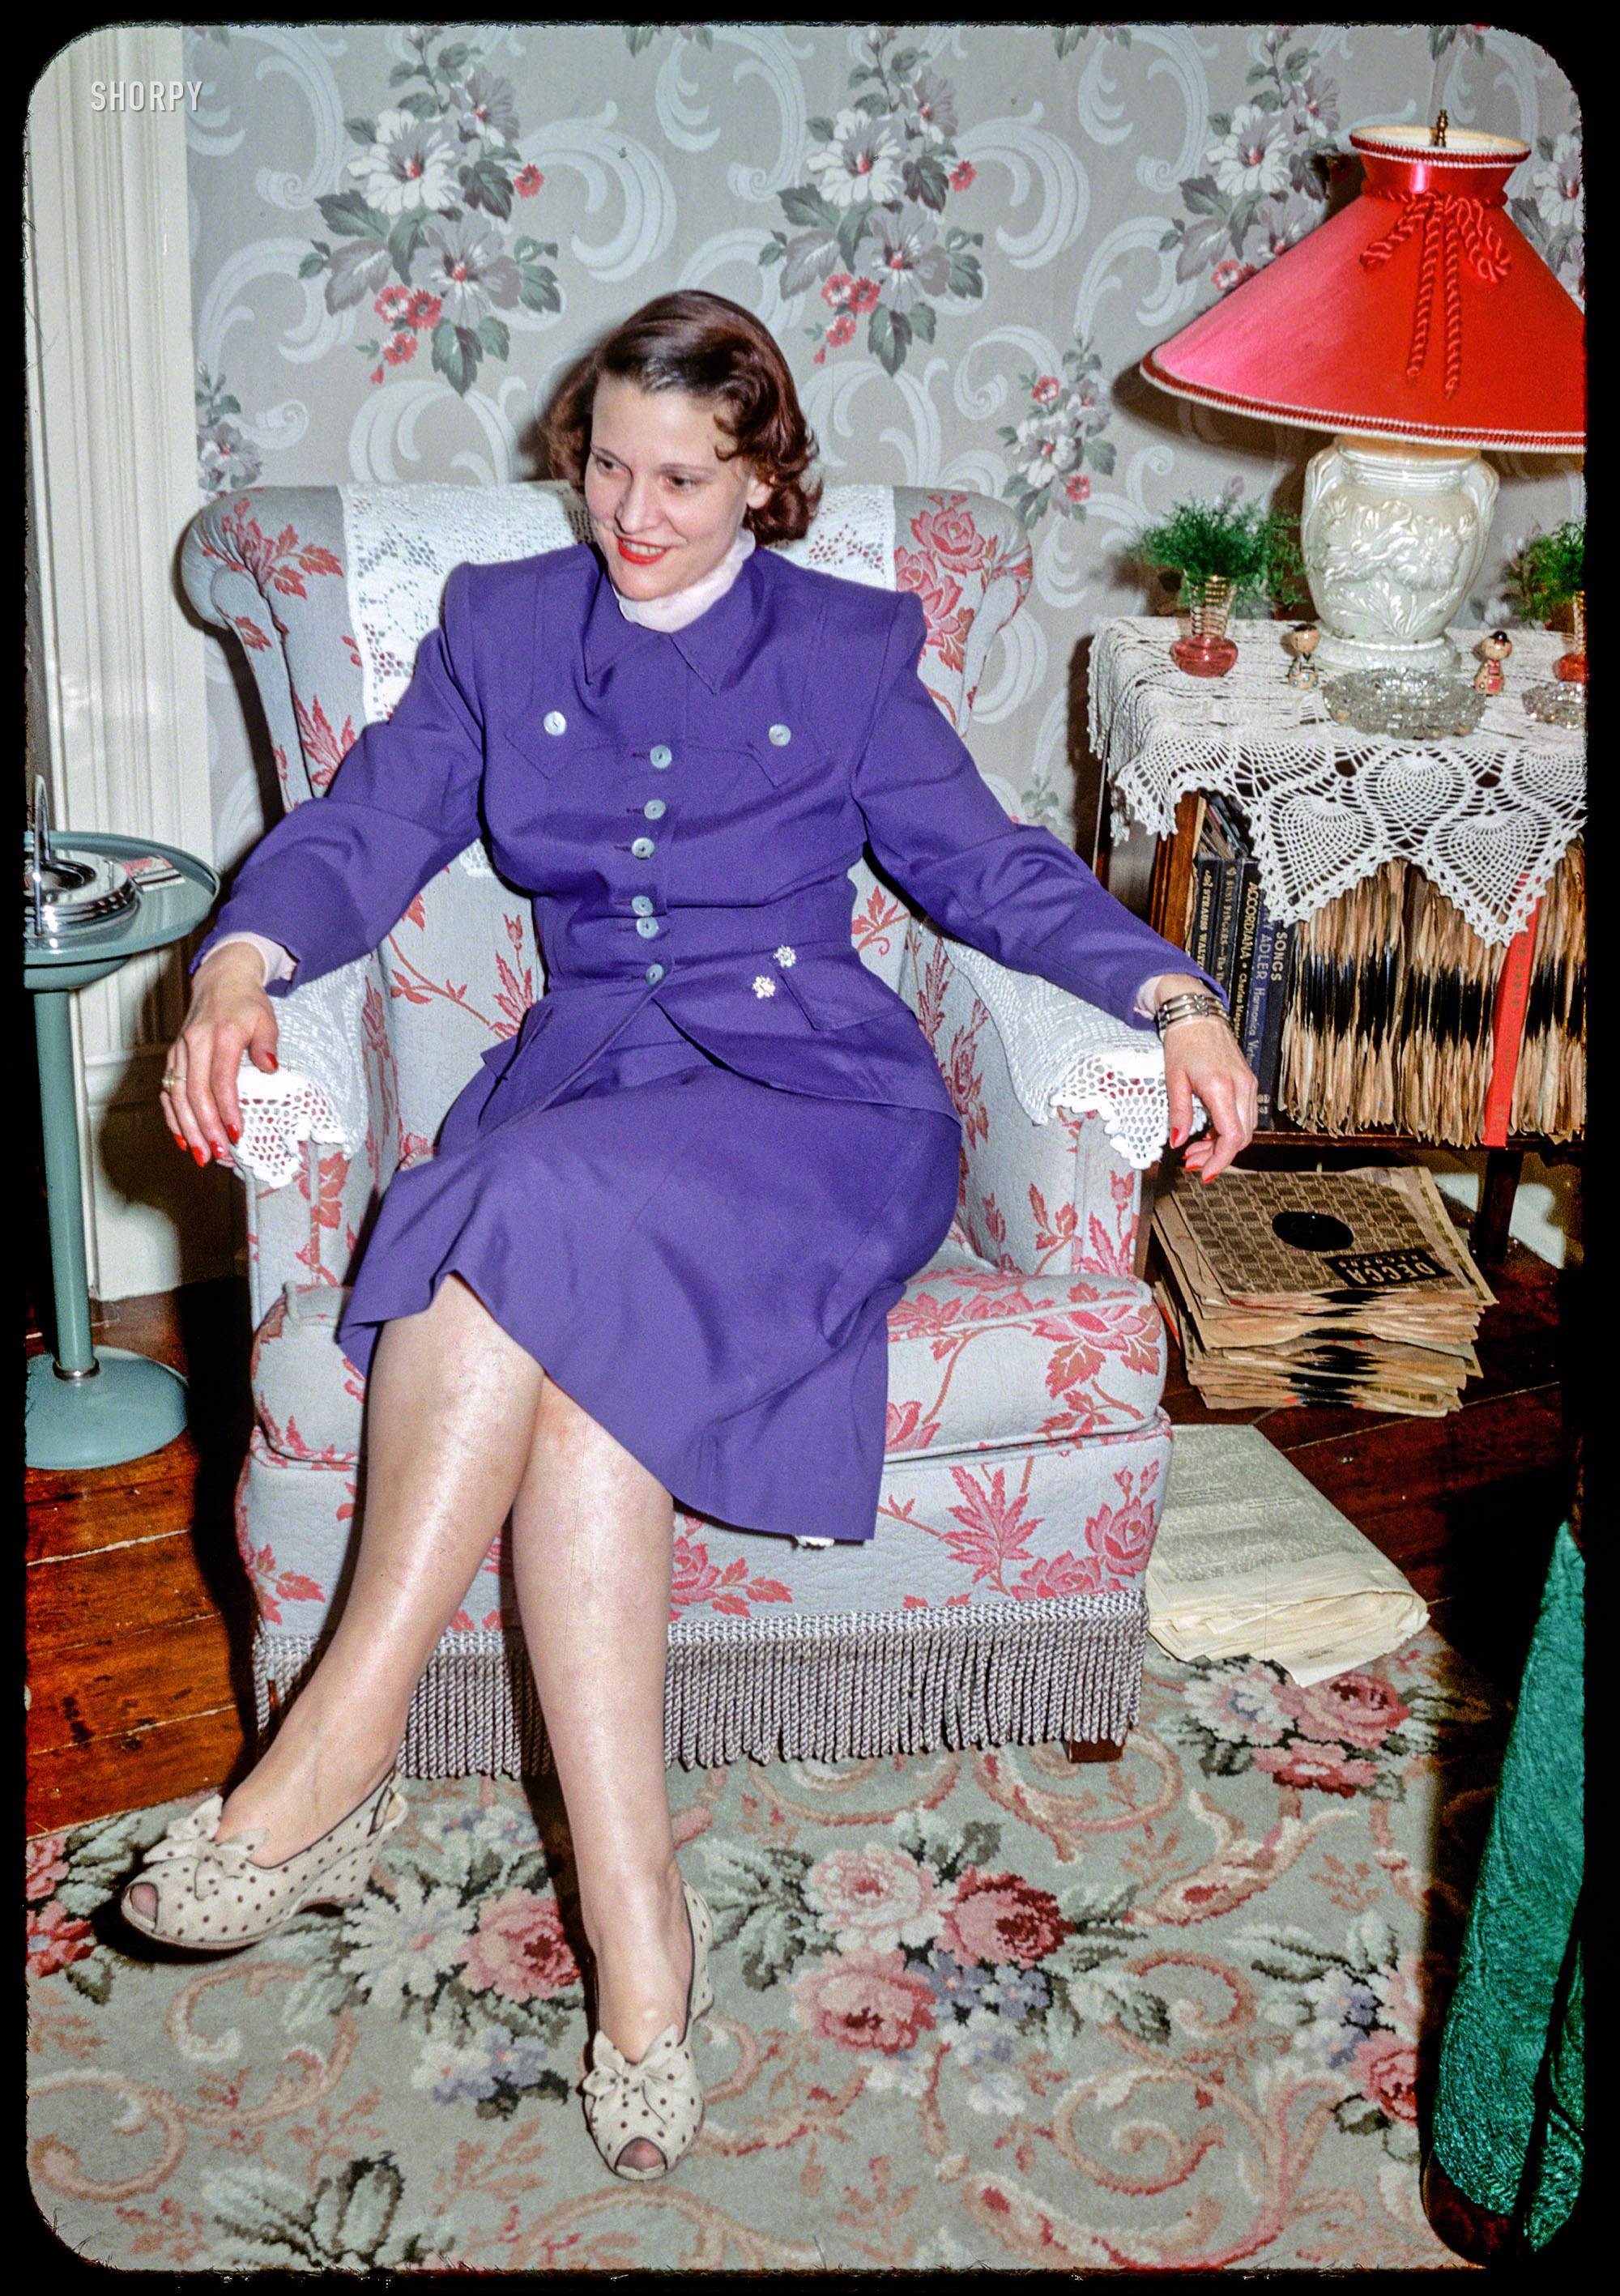 "Kay Fancher -- 23 Feb 1952." The latest episode of Minnesota Kodachromes co-stars Hubert's record collection, which includes the classics Accordiana and Larry Adler: Harmonica Virtuoso. Also: antimacassars protected by antimacassars! 35mm color slide by Hubert Tuttle. View full size.